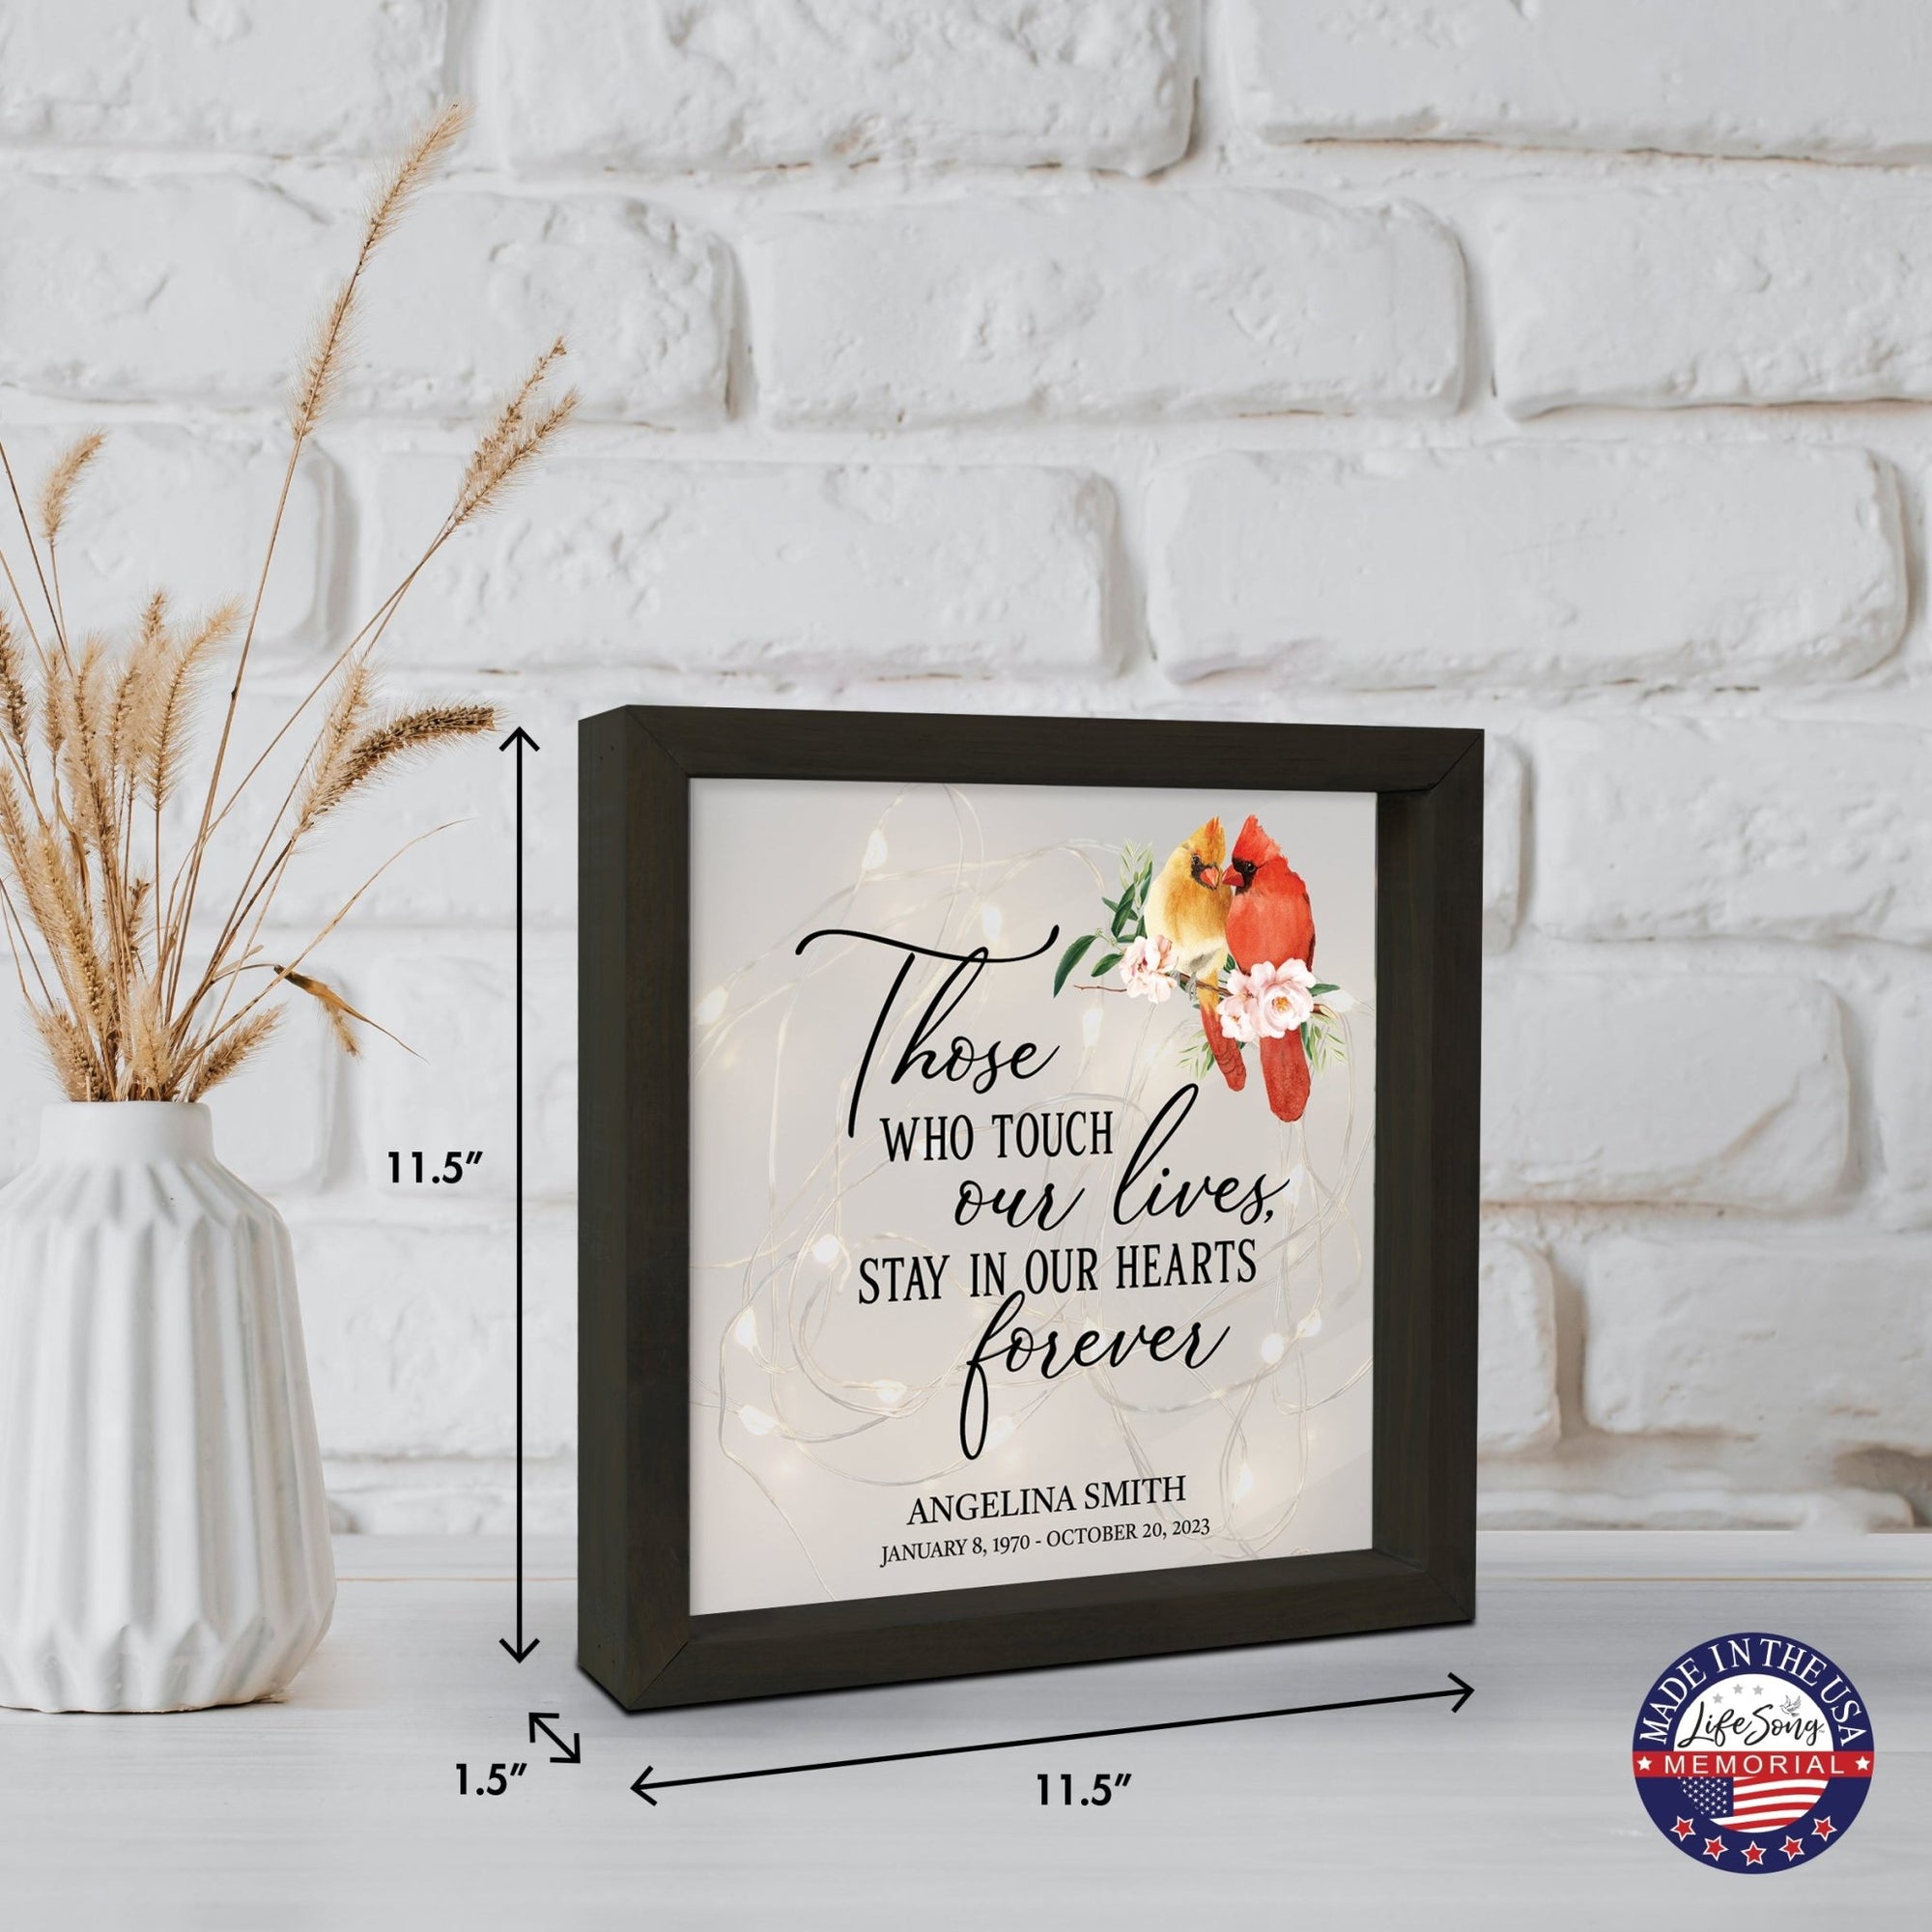 Personalized Memorial Black Framed Shadow Box With Lights Sympathy Gift Wall Décor - Those Who Touch Our Lives - LifeSong Milestones